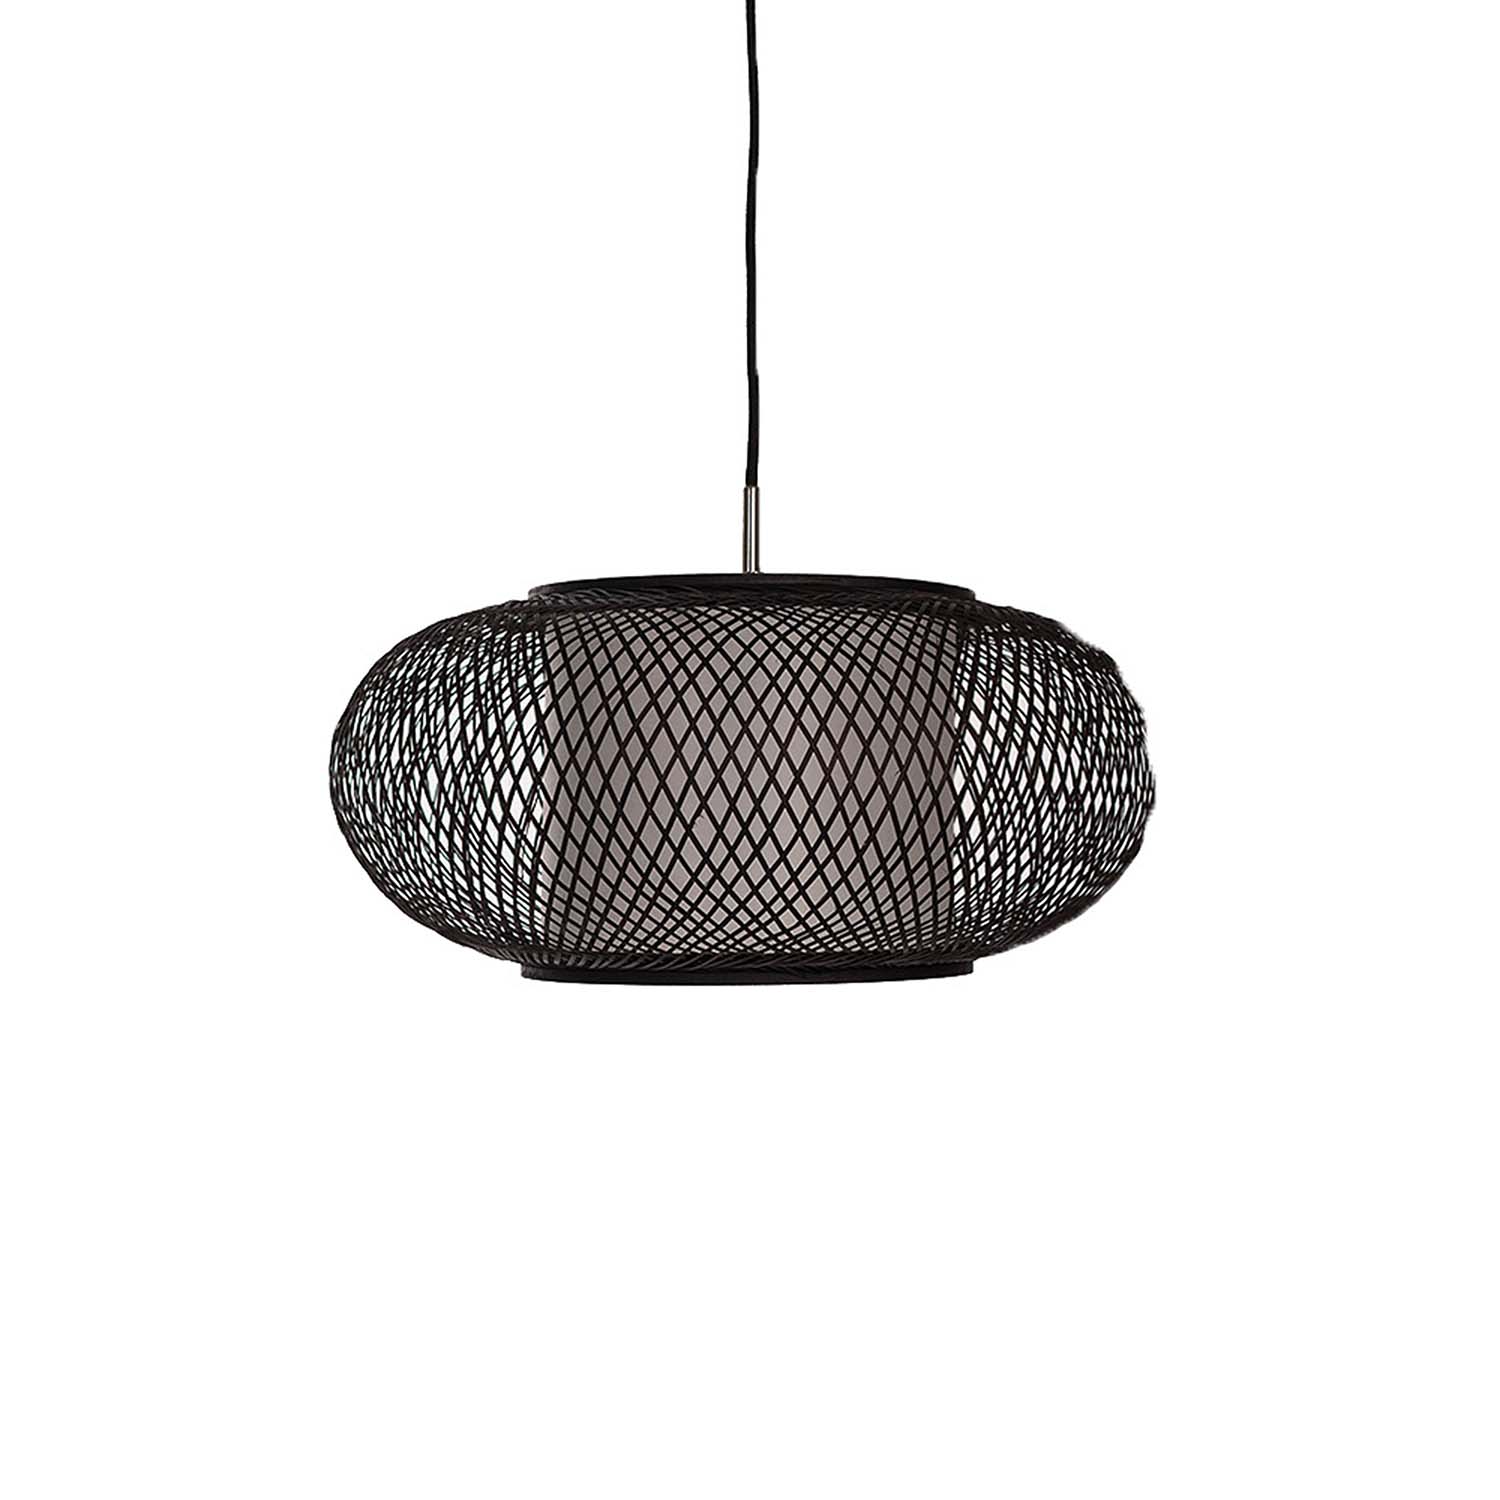 TWIGGY AL - Round pendant light in beige or brown woven bamboo